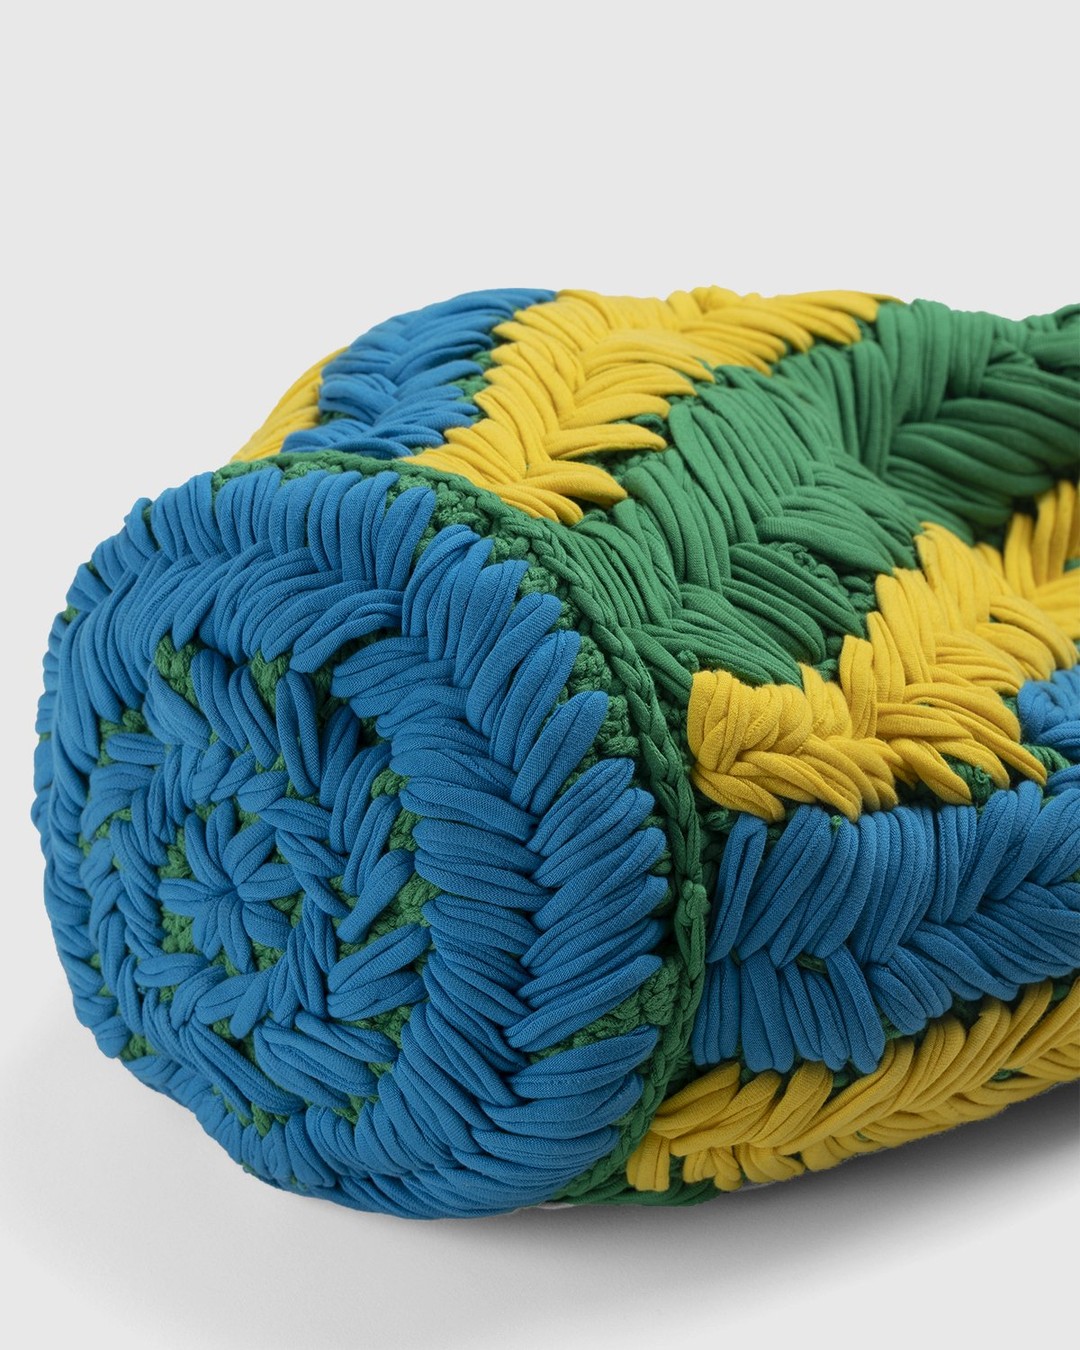 J.W. Anderson – Knitted Shopper Green/Yellow/Blue - Bags - Multi - Image 6